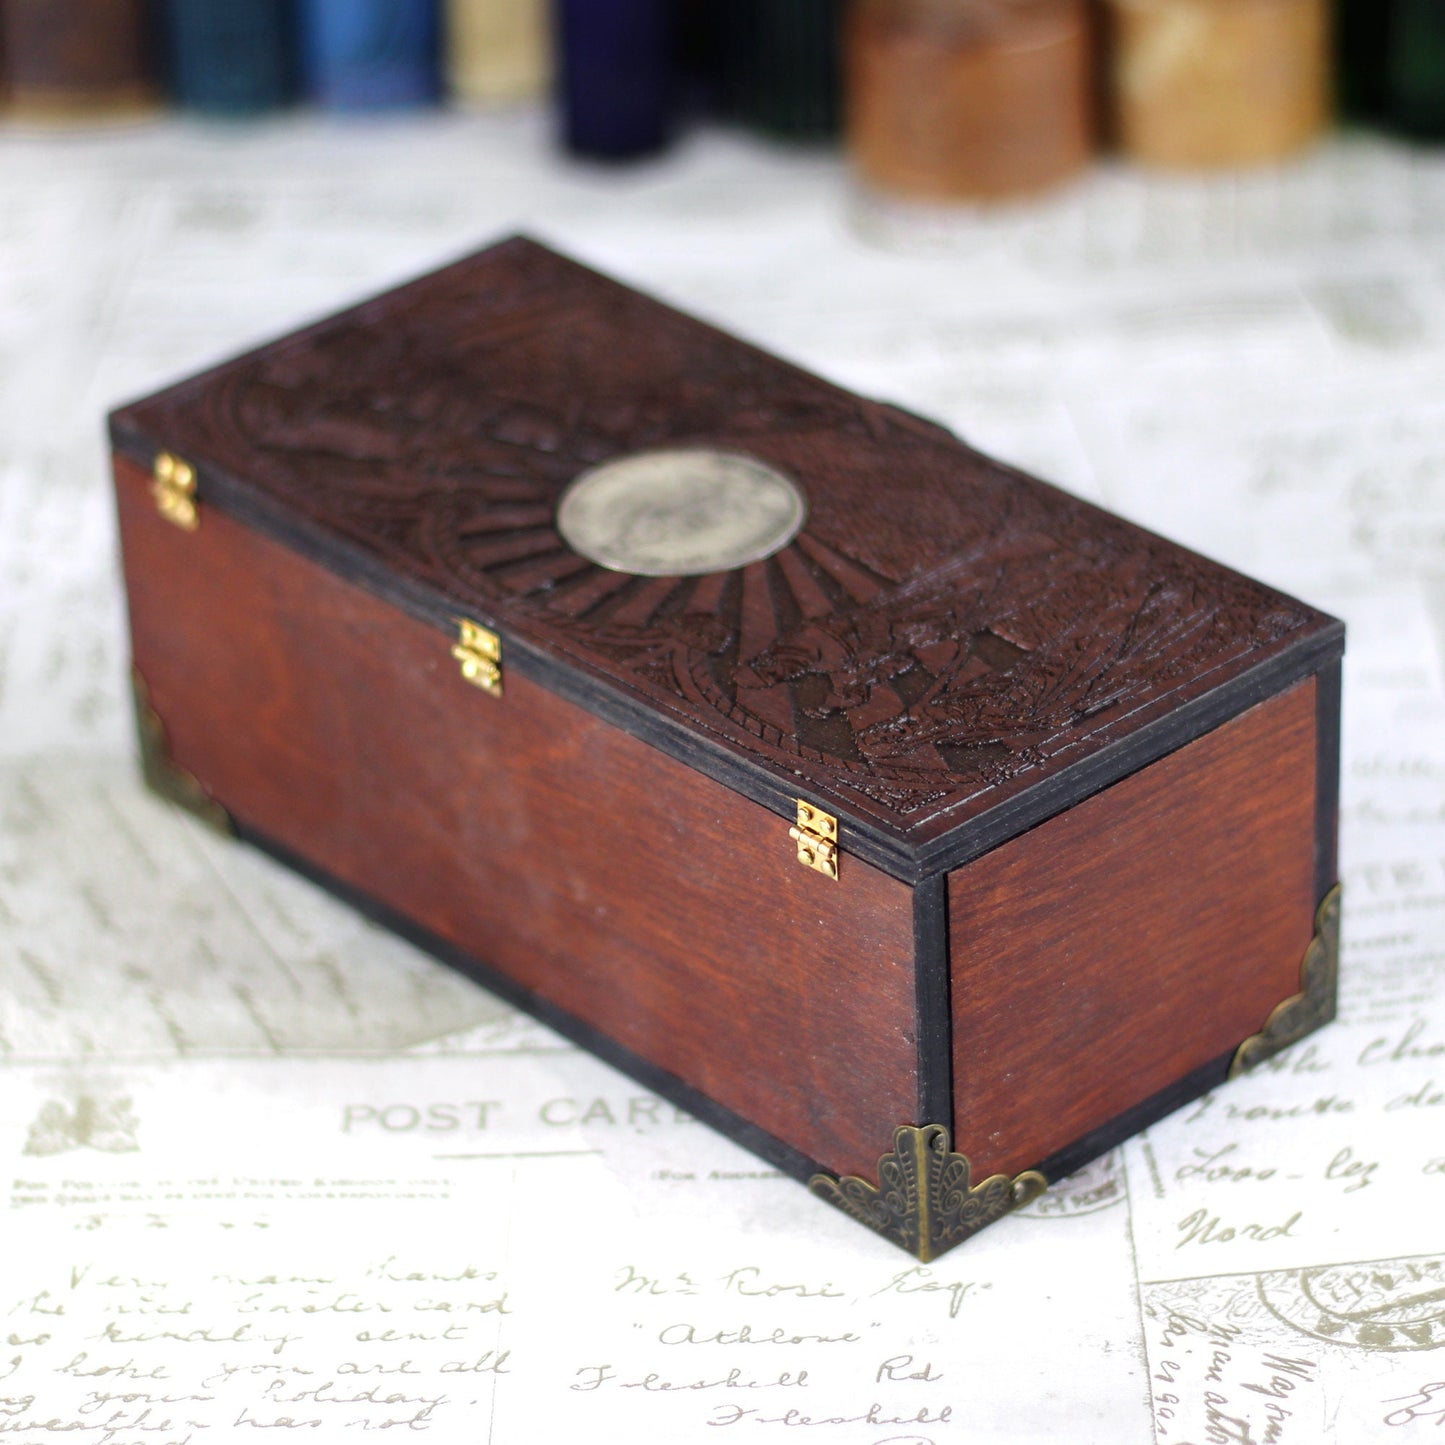 Woodcut keepsake box with gothic skull coin design, could be wooden pencil case, wooden trinket box, Wicca box or wooden jewellery Box